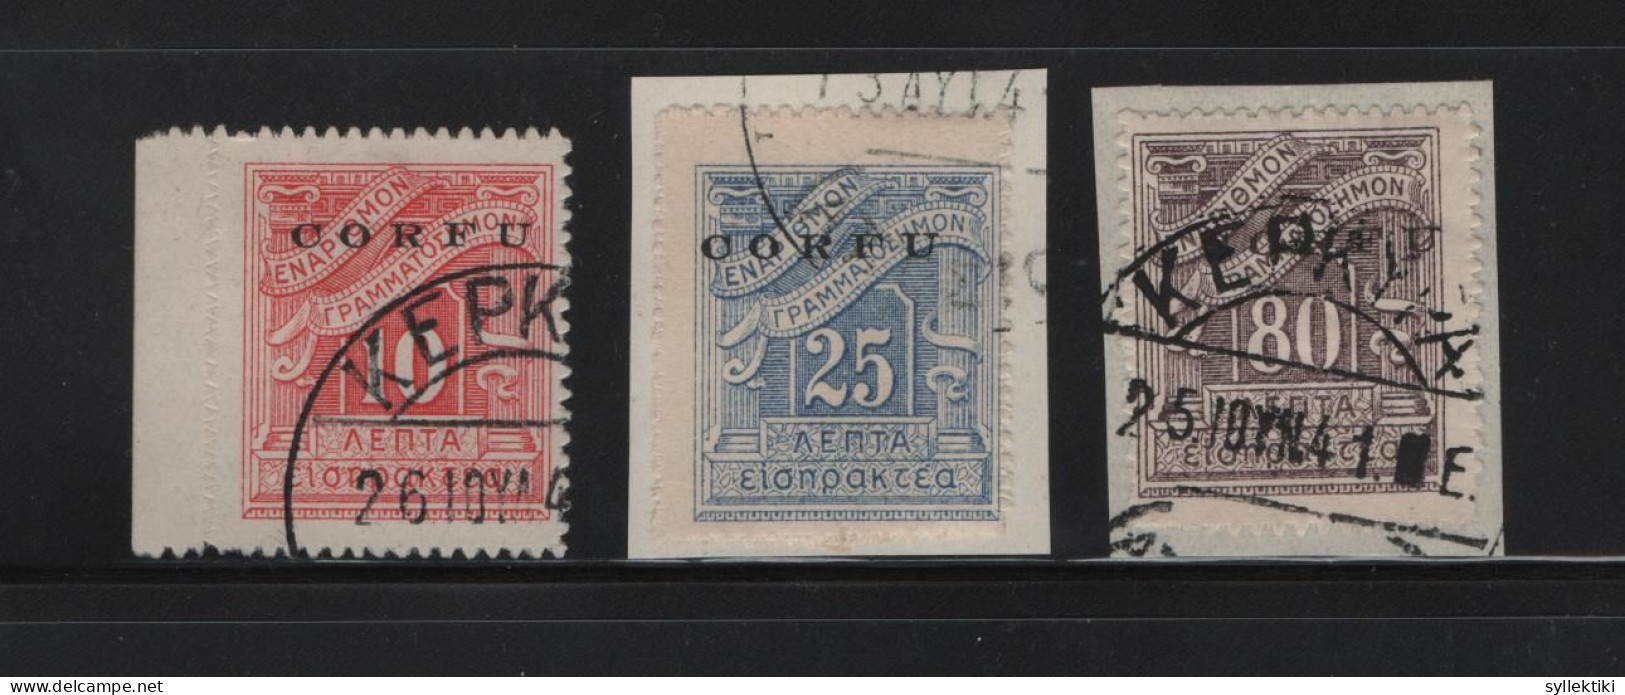 GREECE 1941 IONIAN ISLANDS OVERPRINTED CORFU ON 3 POSTAGE DUE USED STAMPS      HELLAS No 35 - 37 AND VALUE EURO 620.00 - Ionian Islands